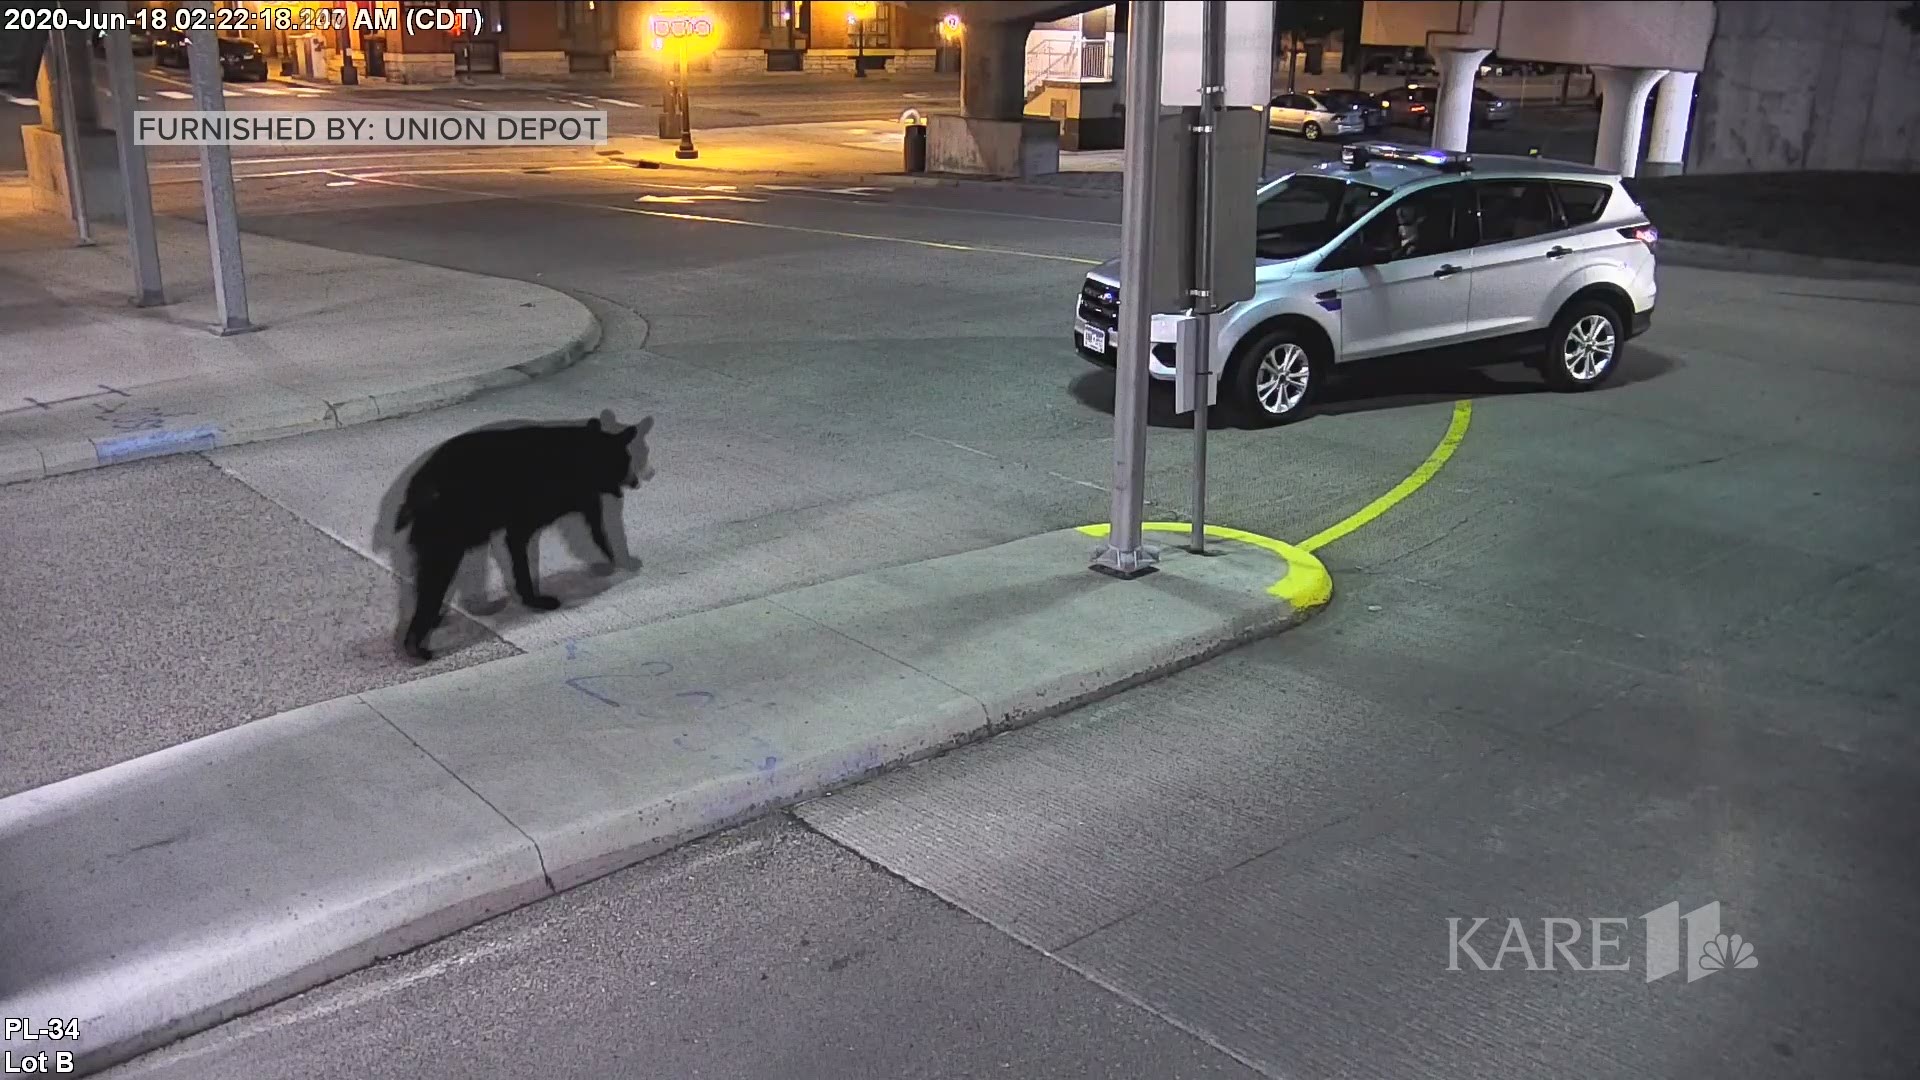 Security cameras captured footage of a bear wandering a parking lot outside St. Paul's Union Depot early in the morning on Thursday, June 18, 2020.